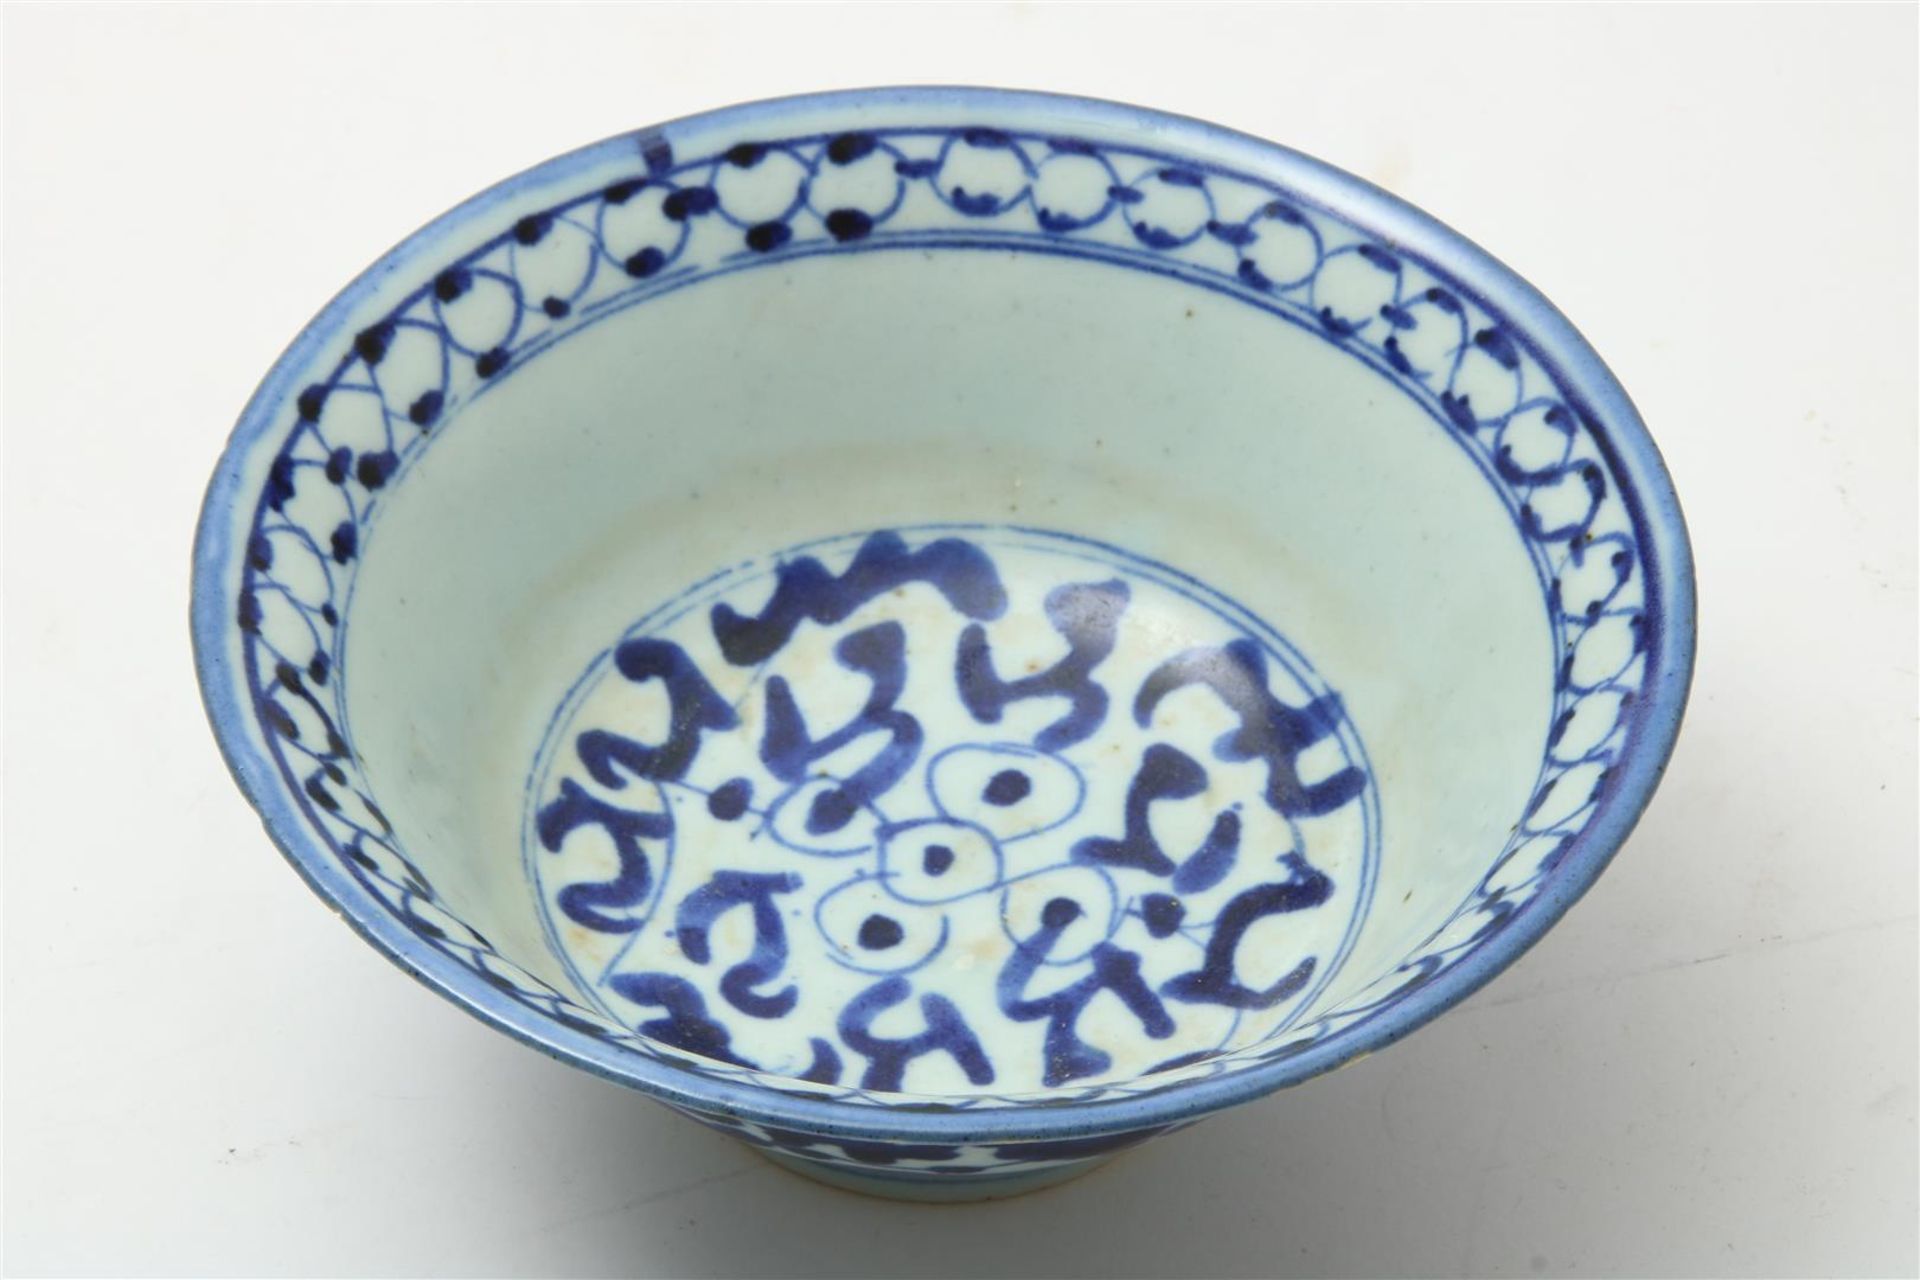 Porcelain bowl blue decorated with flowers, China 18th/19th century, marked with shopkeeper's - Image 2 of 5